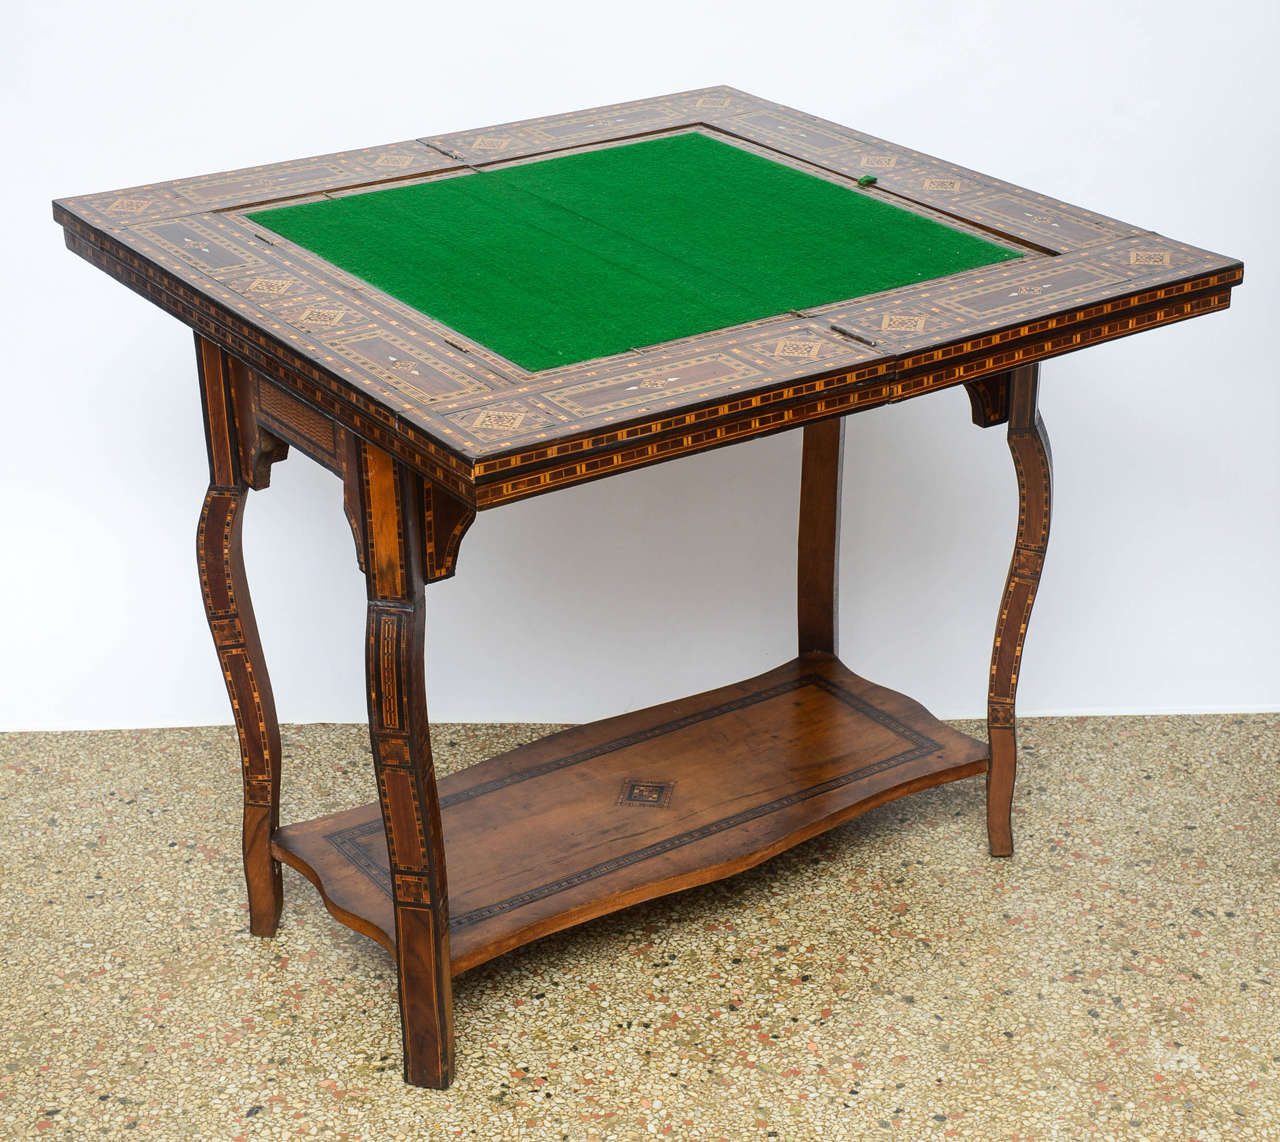 20th Century Moroccan Games or Console Table with Inlays, circa 1900